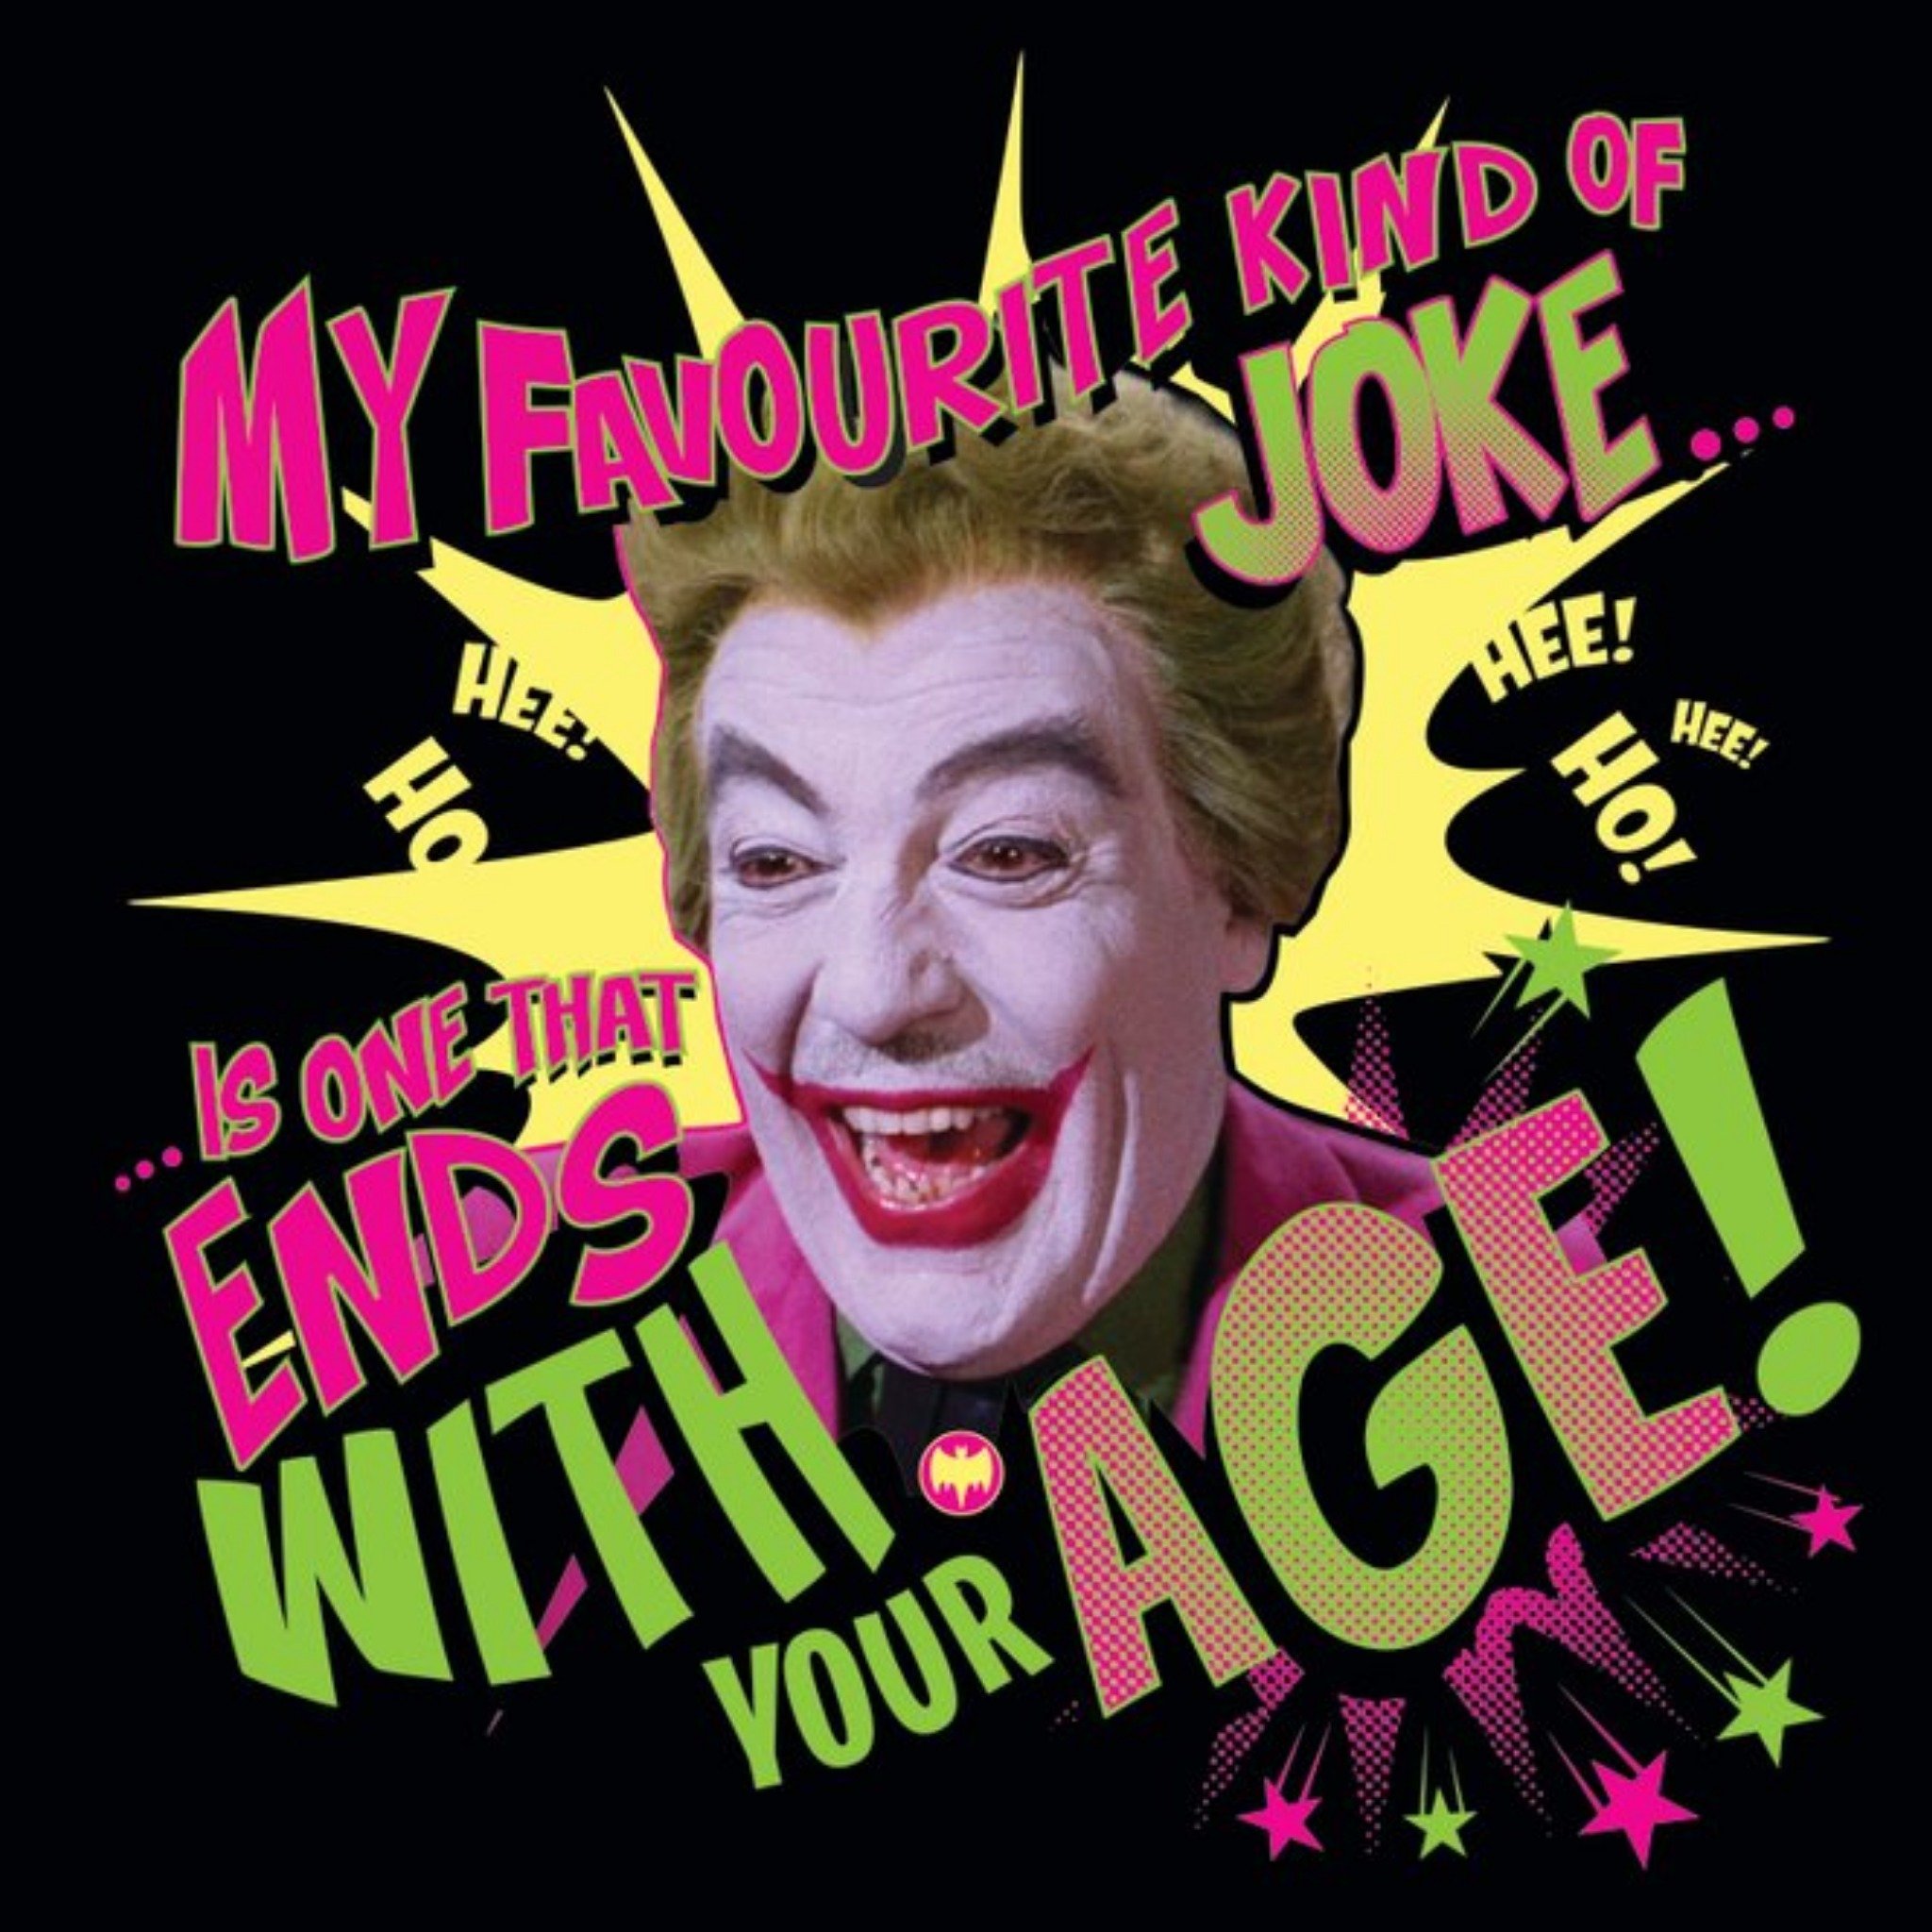 Batman My Favourite Kind Of Joke.. Is One That Ends With Your Age - The Joker, Large Card